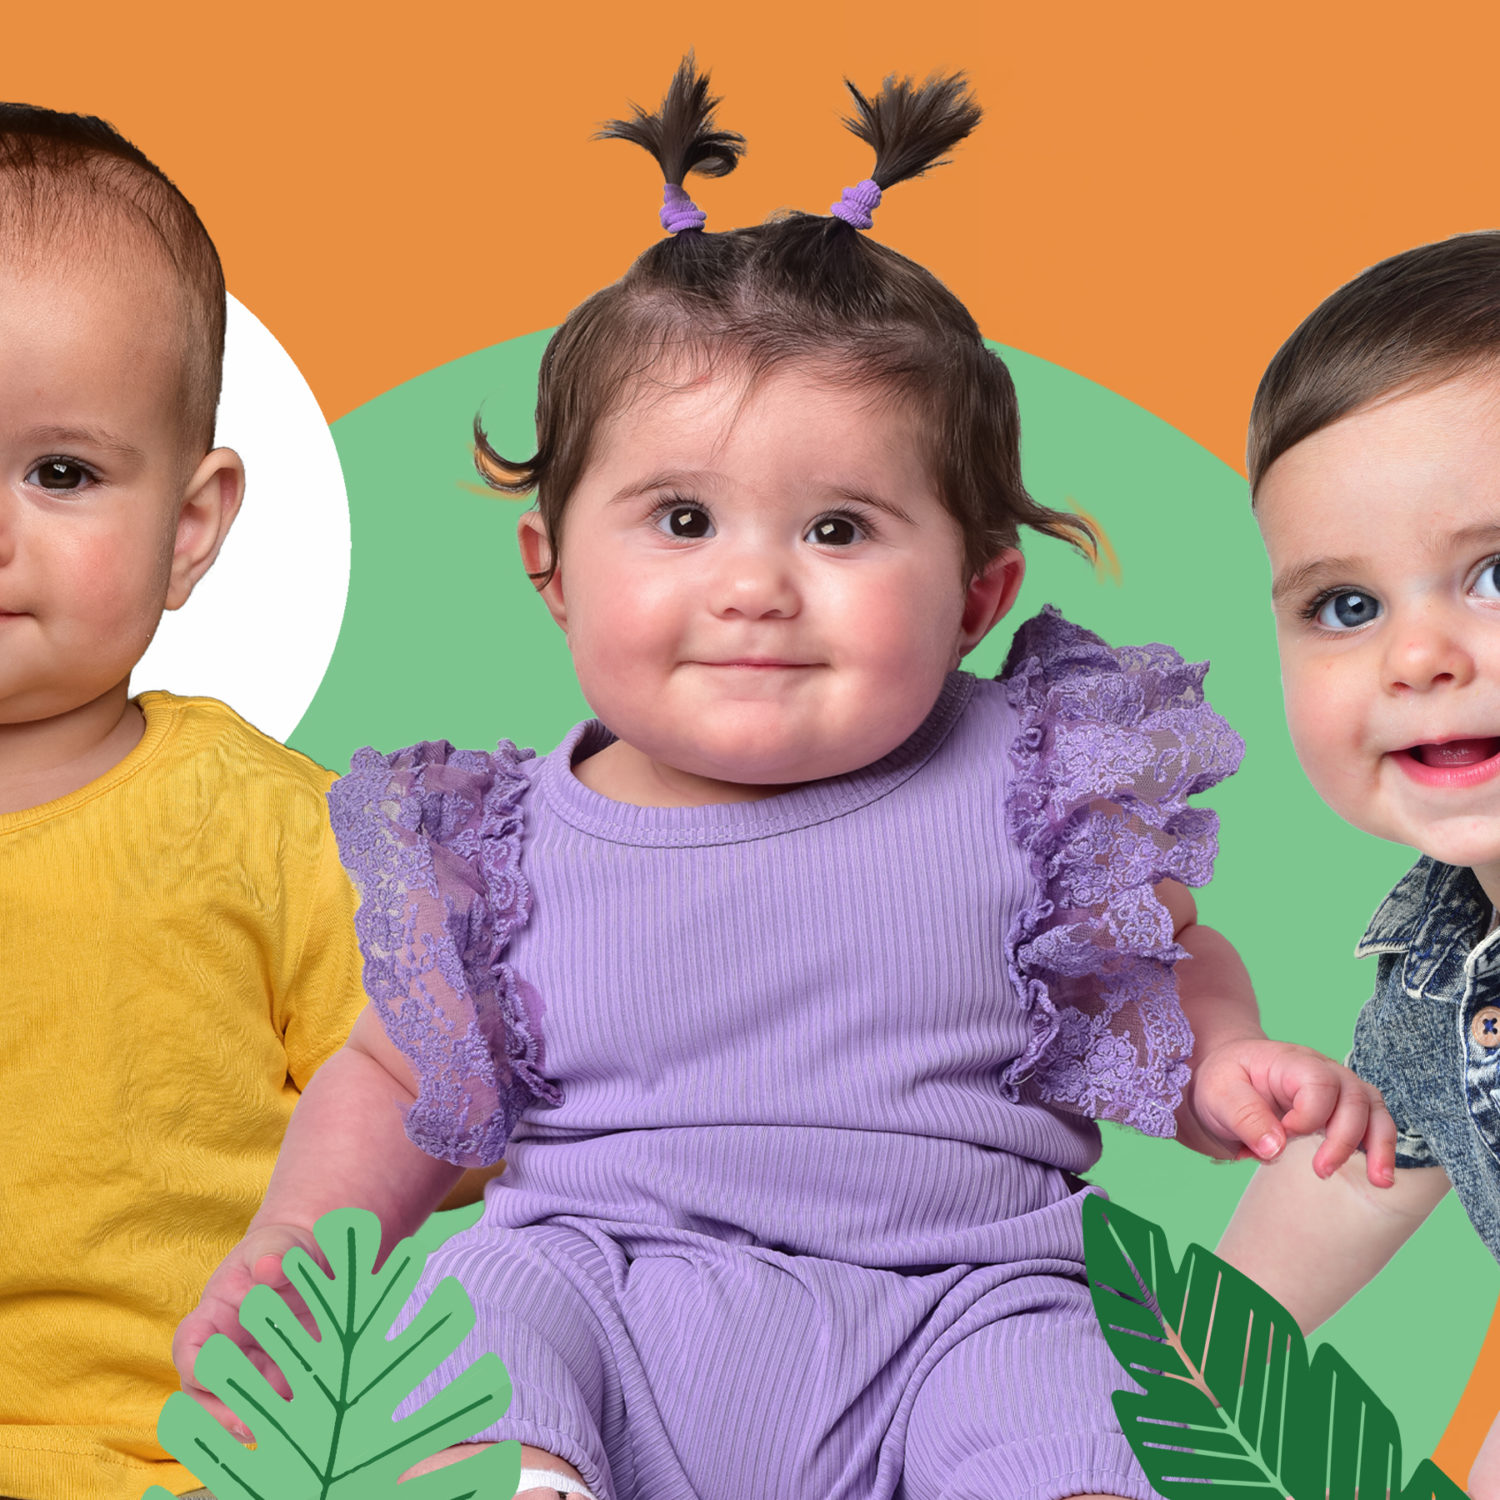 Everything You Need to Know About Baby Modelling